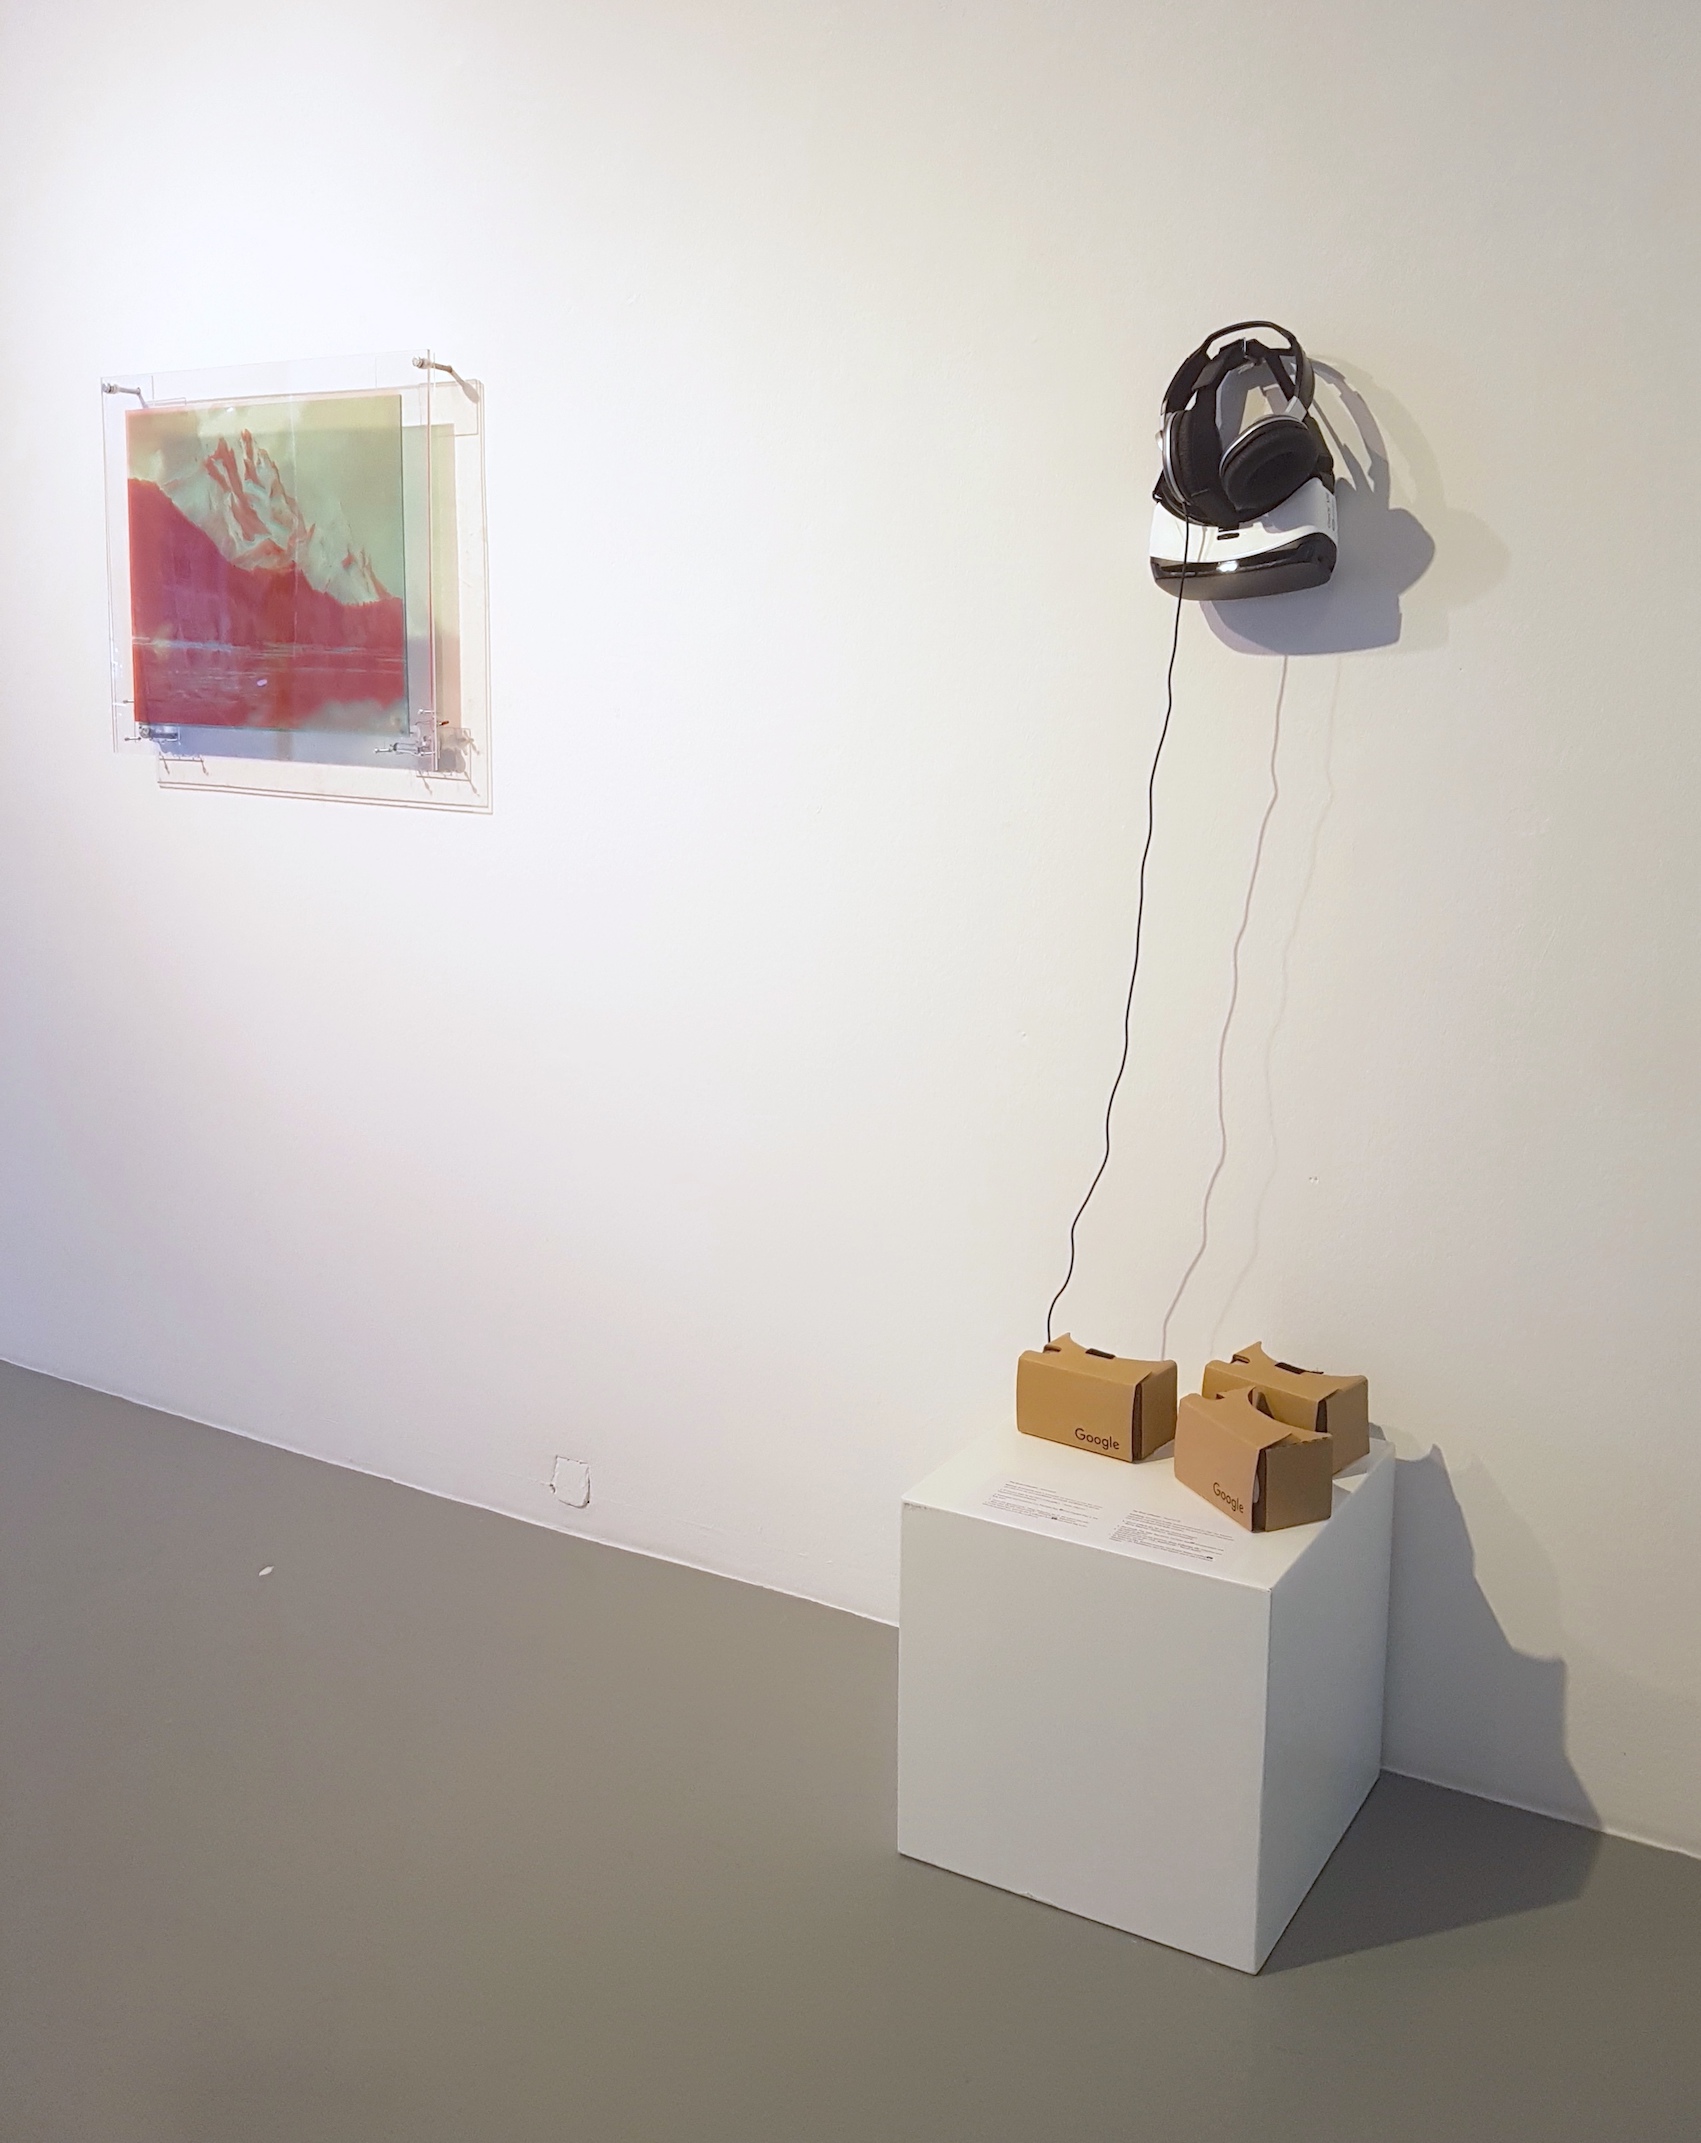 Exhibition view RESET III AND VIRTUAL REALITY, artworks by Judith Sönnicken and The Swan Collective